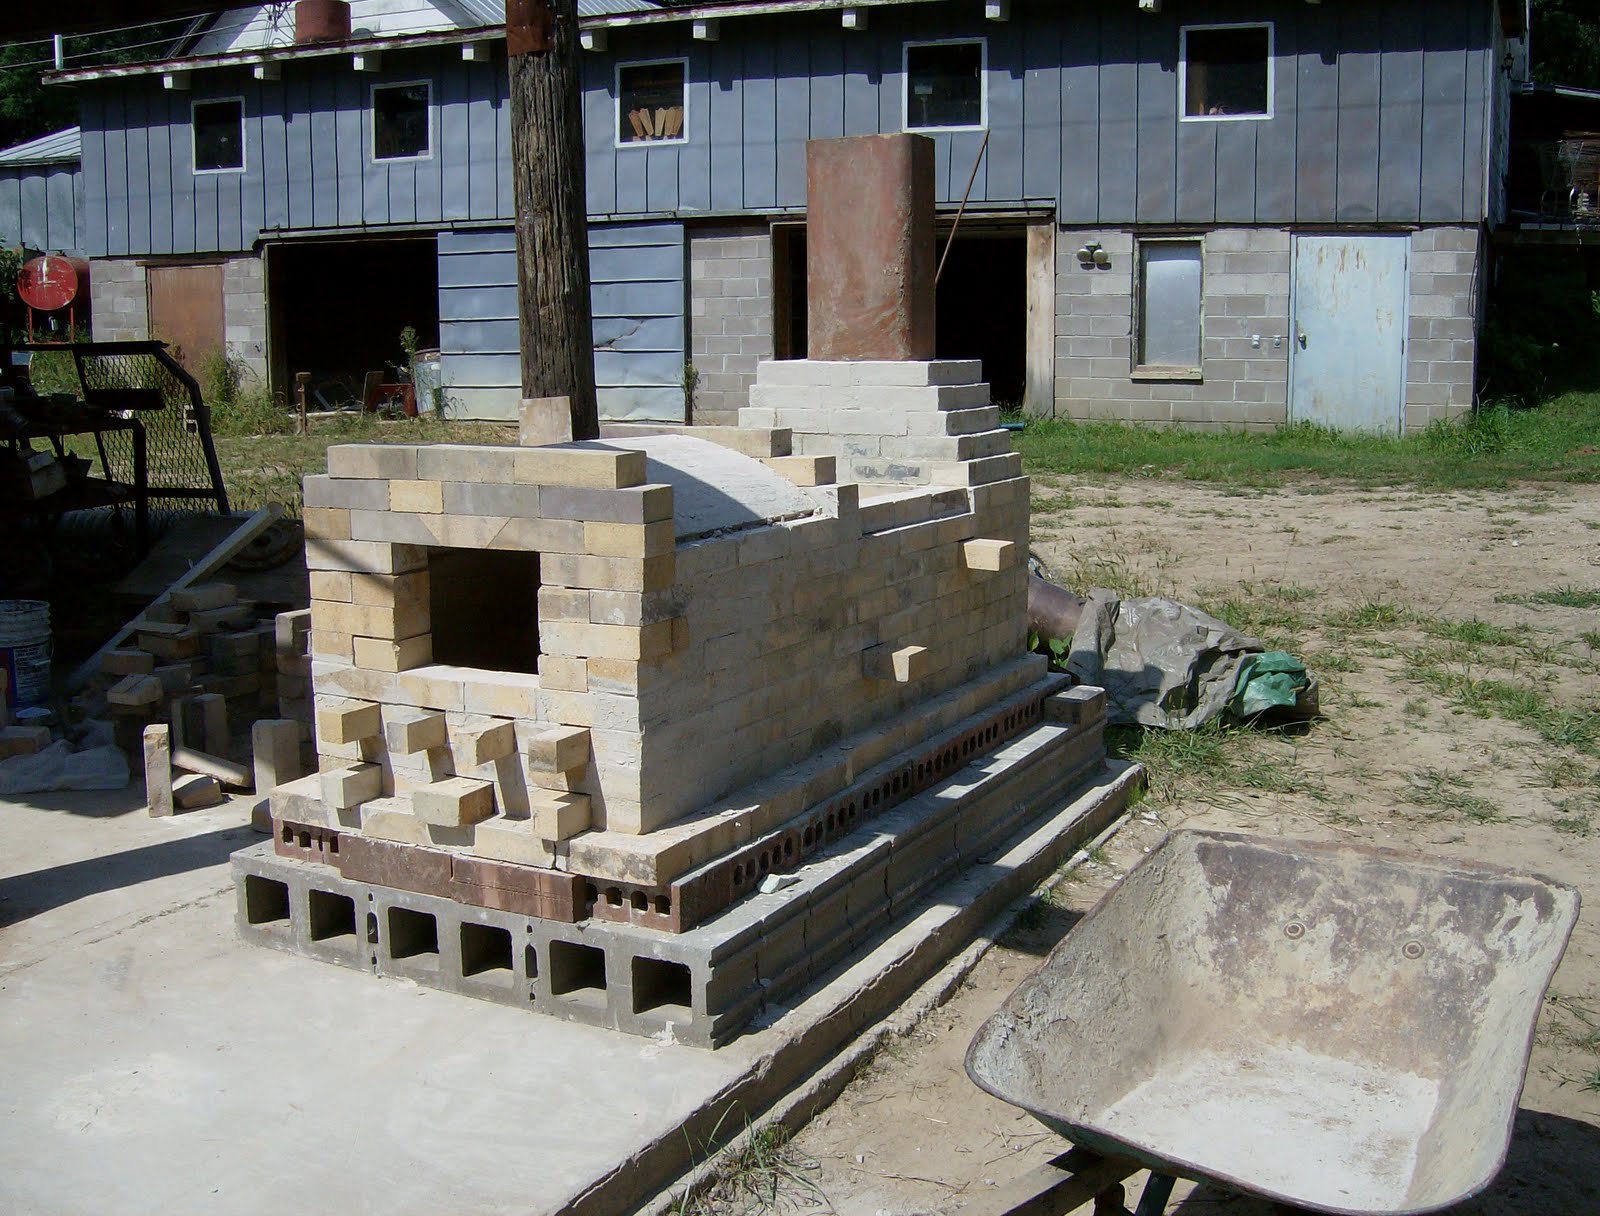 Project DIY: How to build wood kiln